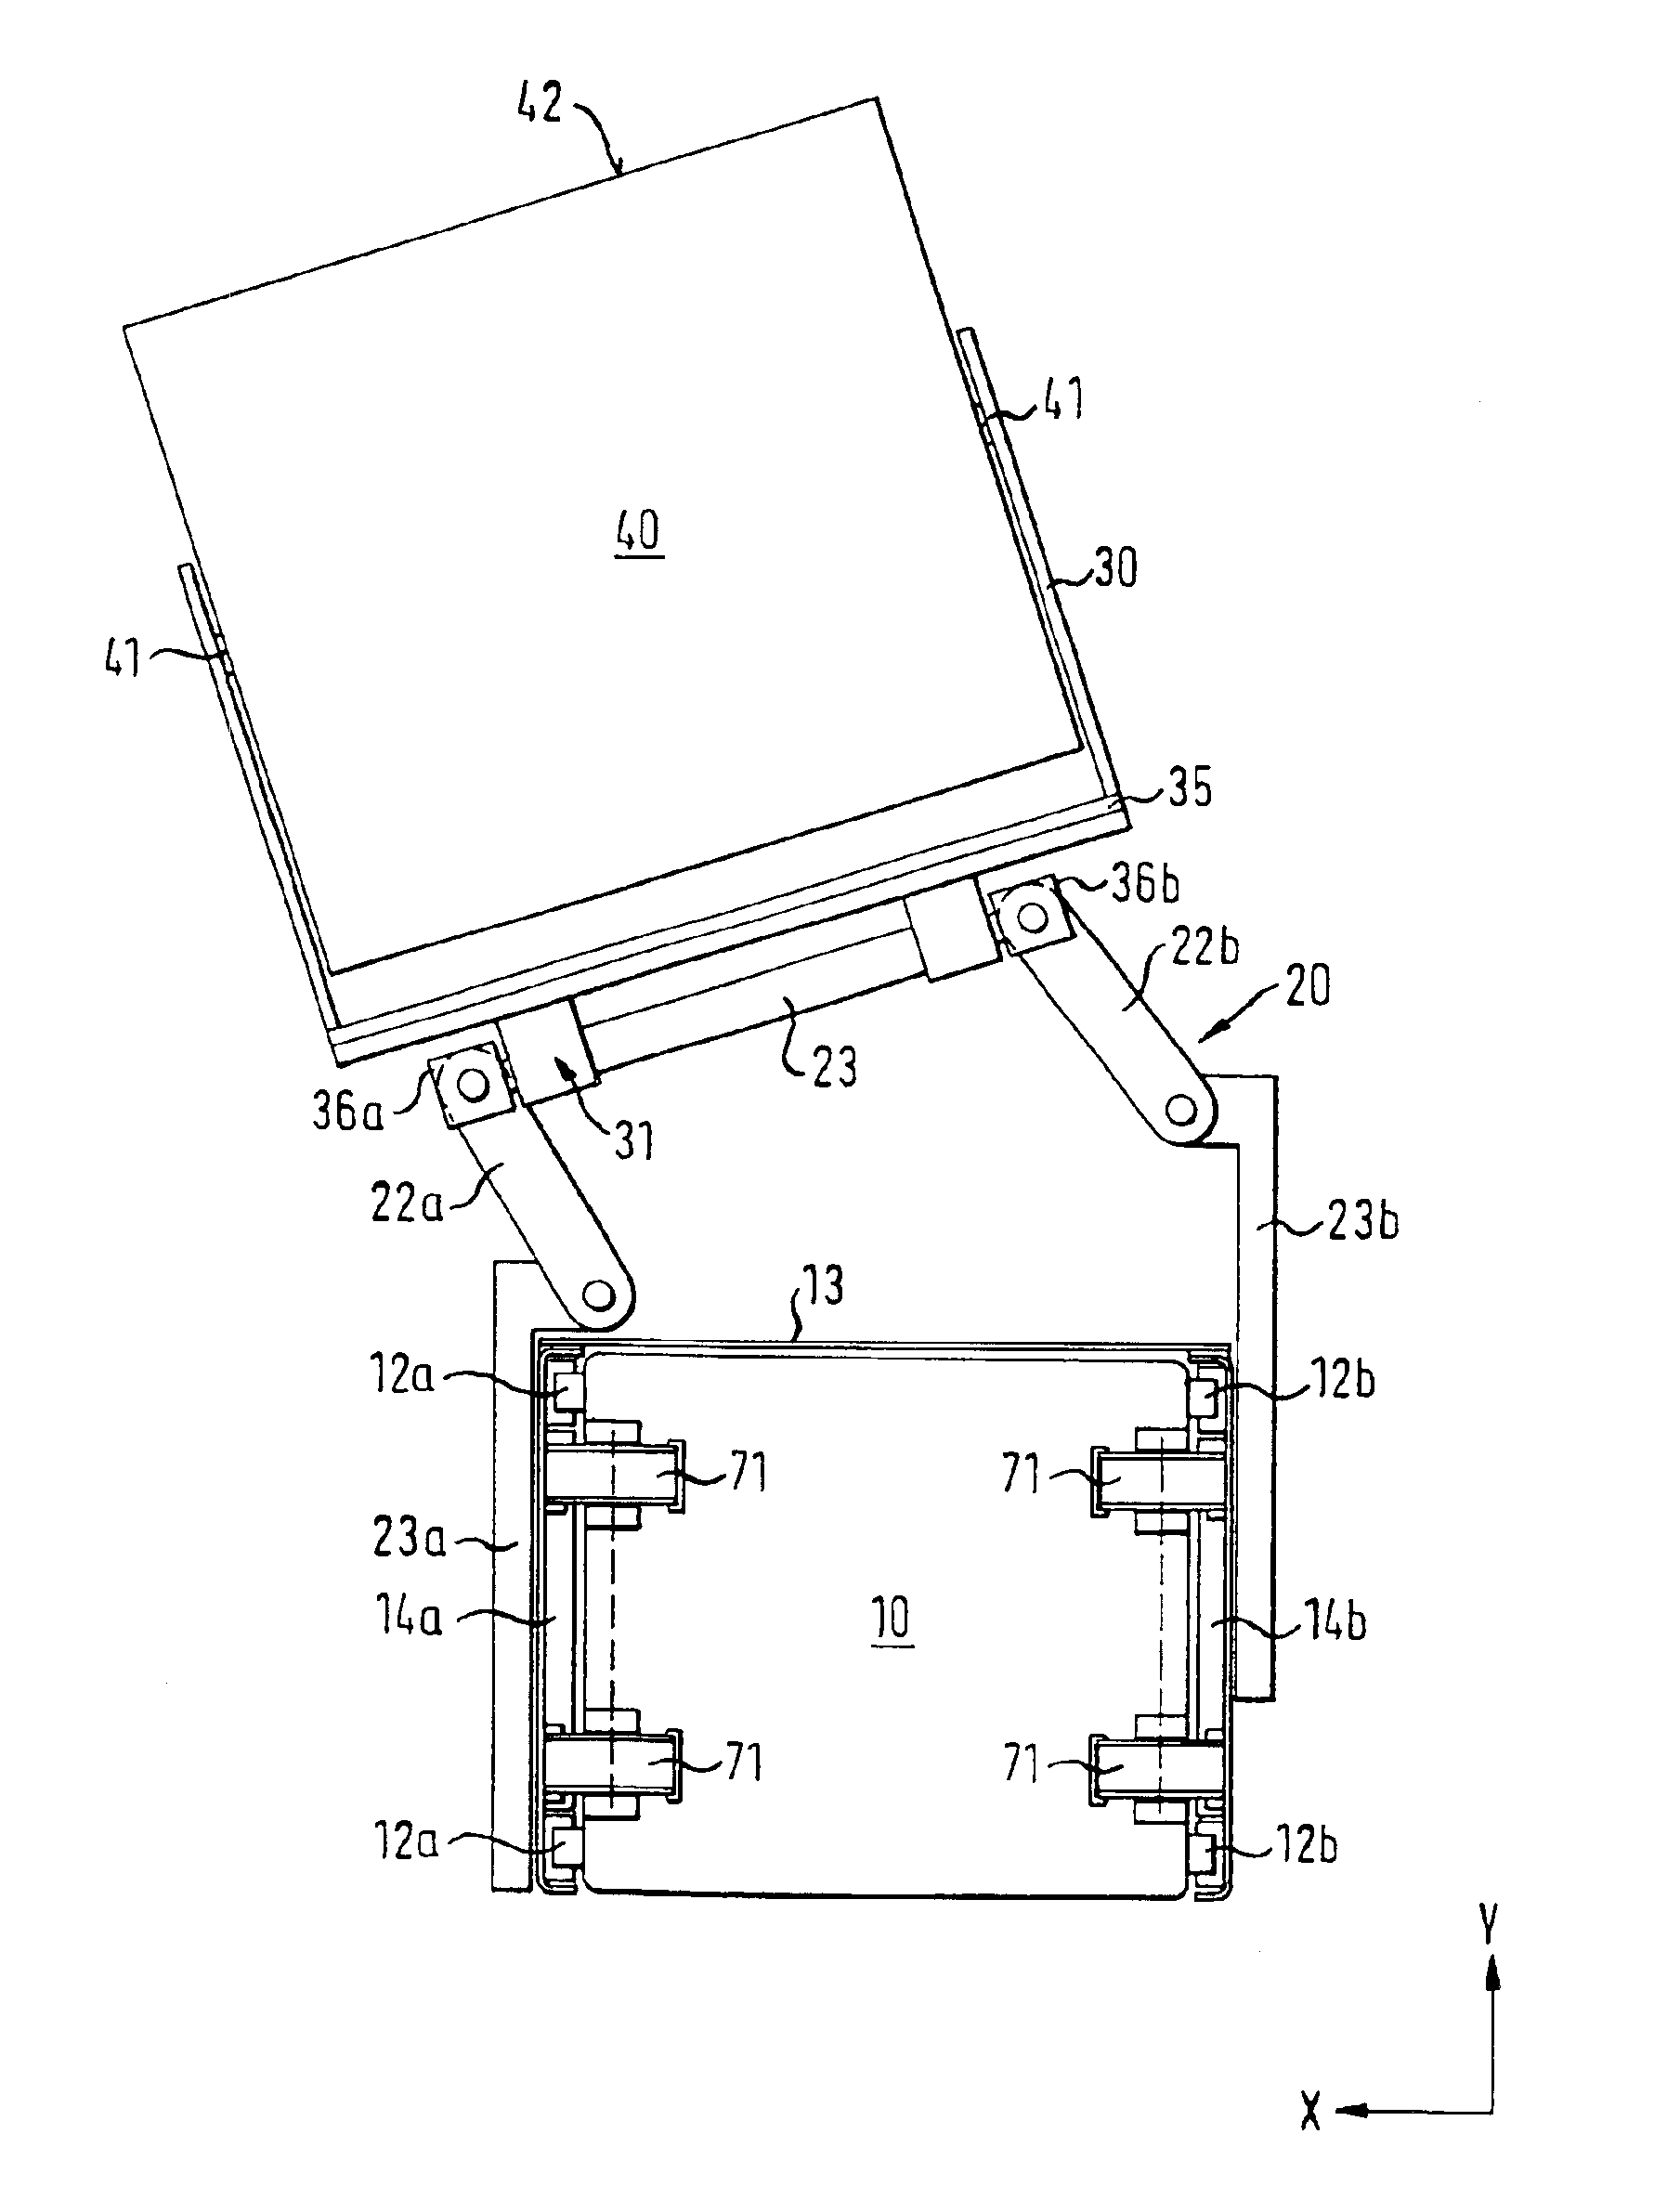 Handling device, especially for positioning a test head on a testing device